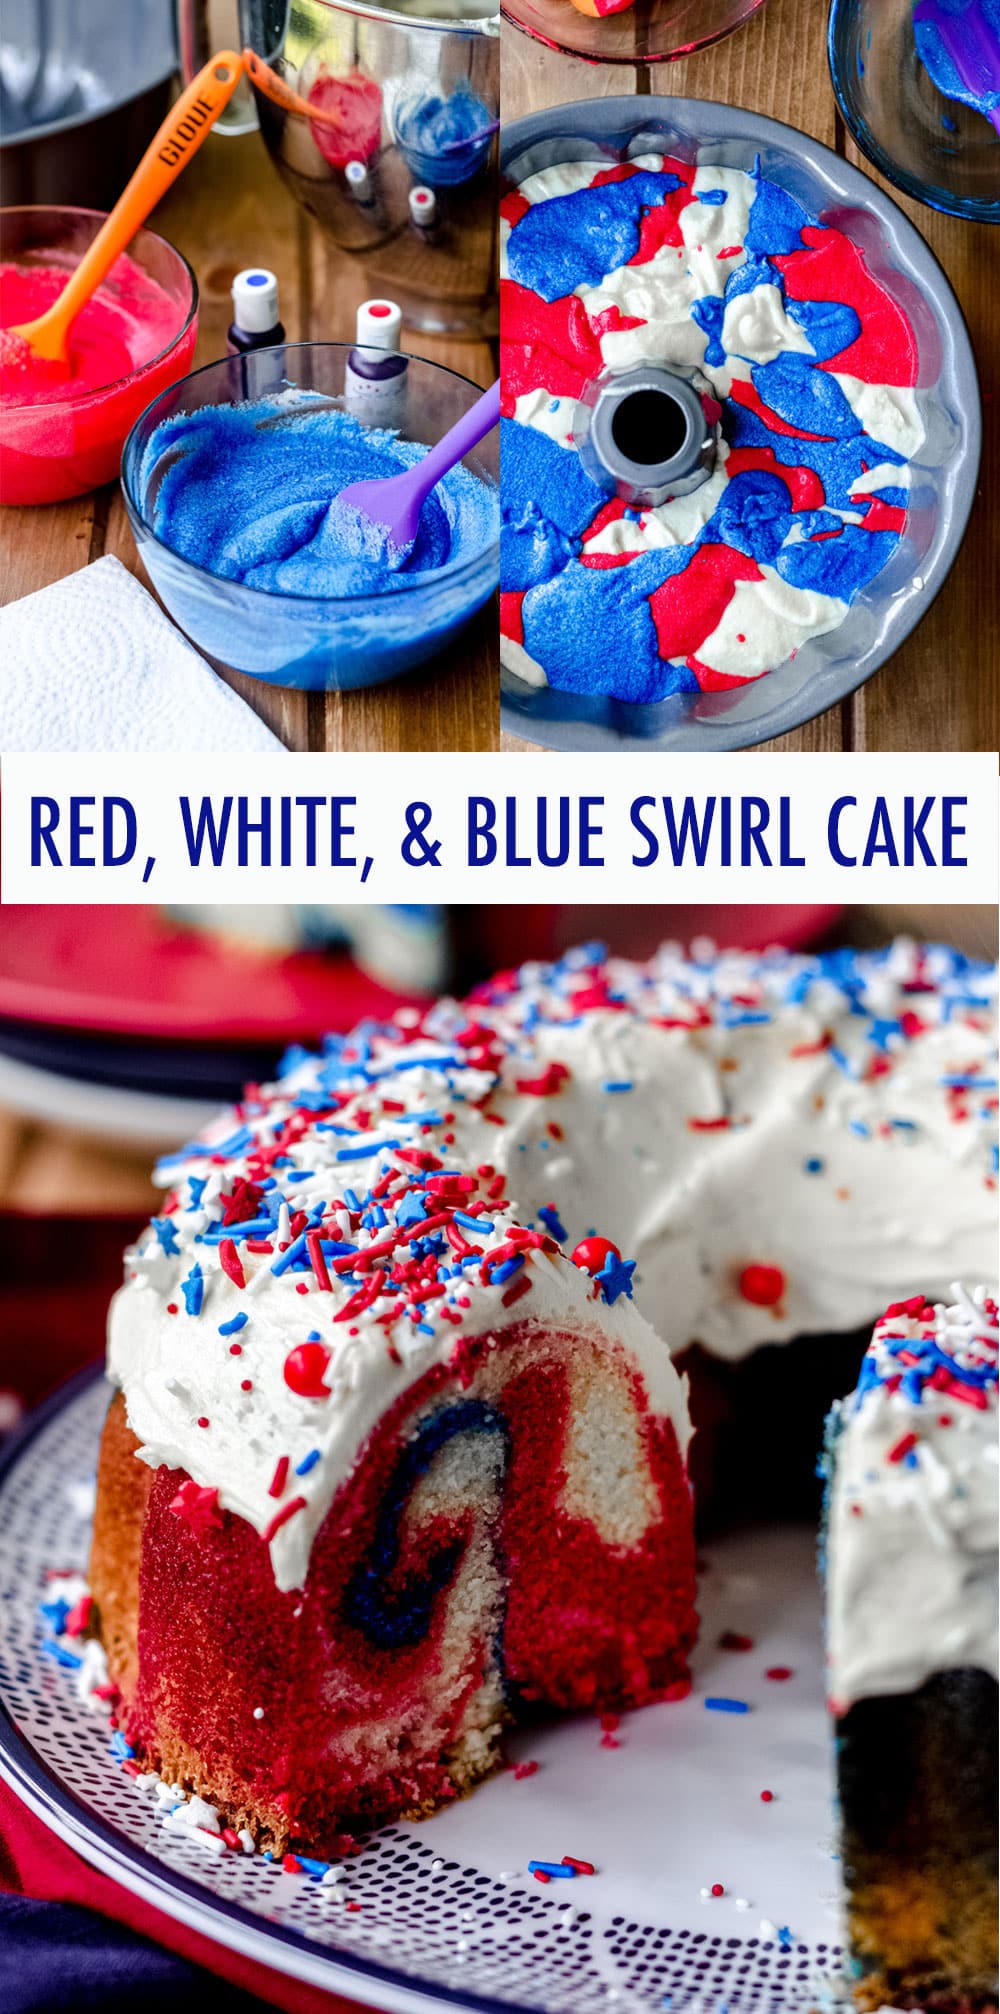 Classic white cake, swirled with colored batter for a patriotic flair. Change up the colors to match your occasion! via @frshaprilflours